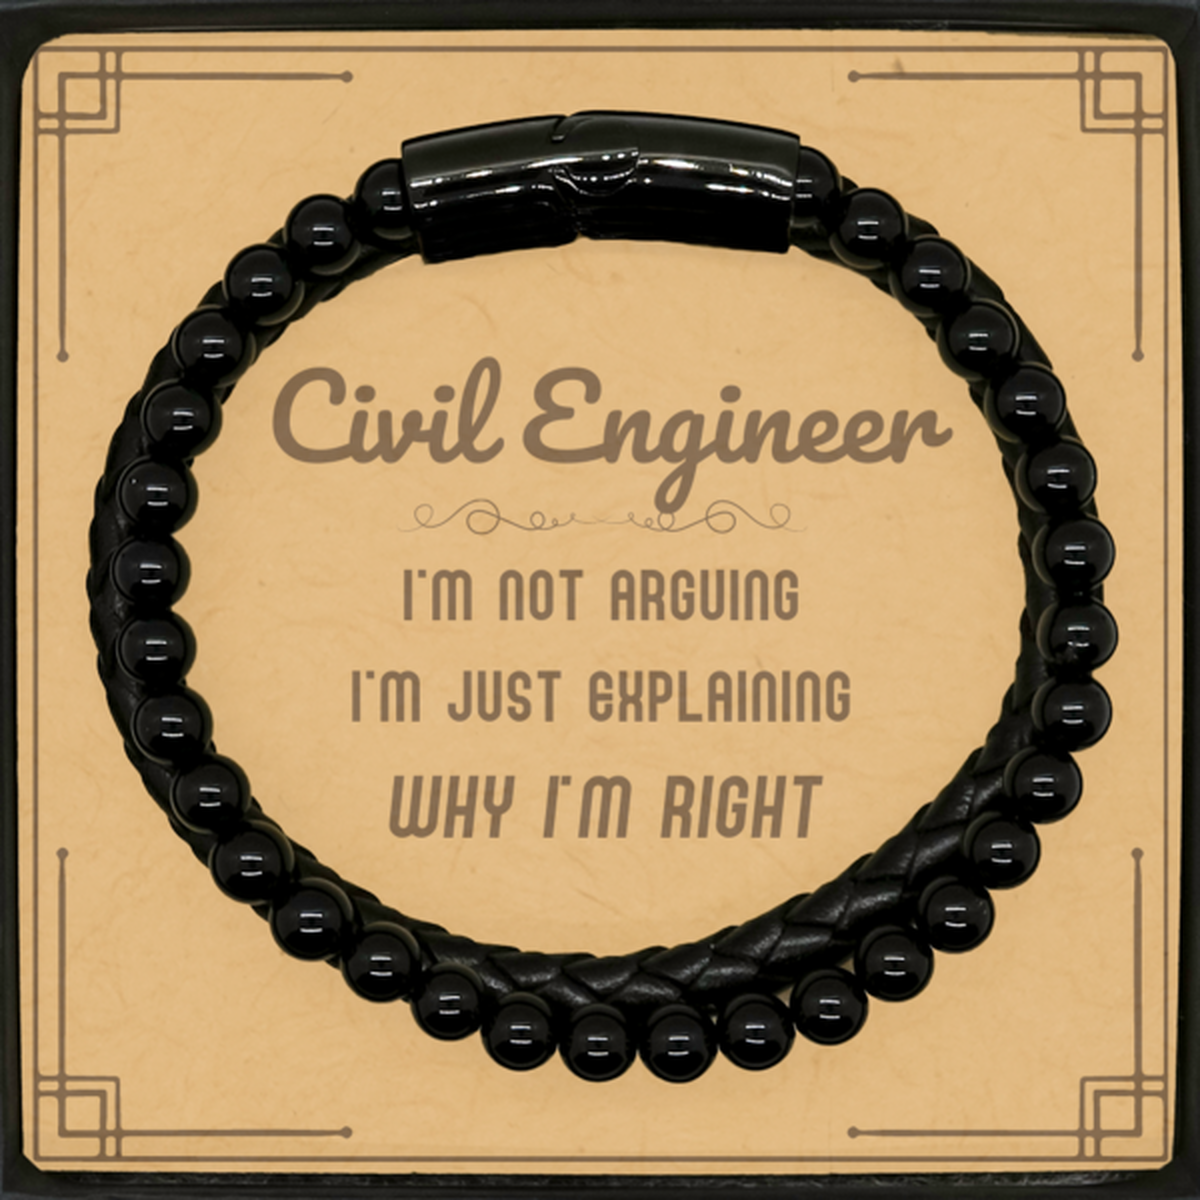 Civil Engineer I'm not Arguing. I'm Just Explaining Why I'm RIGHT Stone Leather Bracelets, Funny Saying Quote Civil Engineer Gifts For Civil Engineer Message Card Graduation Birthday Christmas Gifts for Men Women Coworker